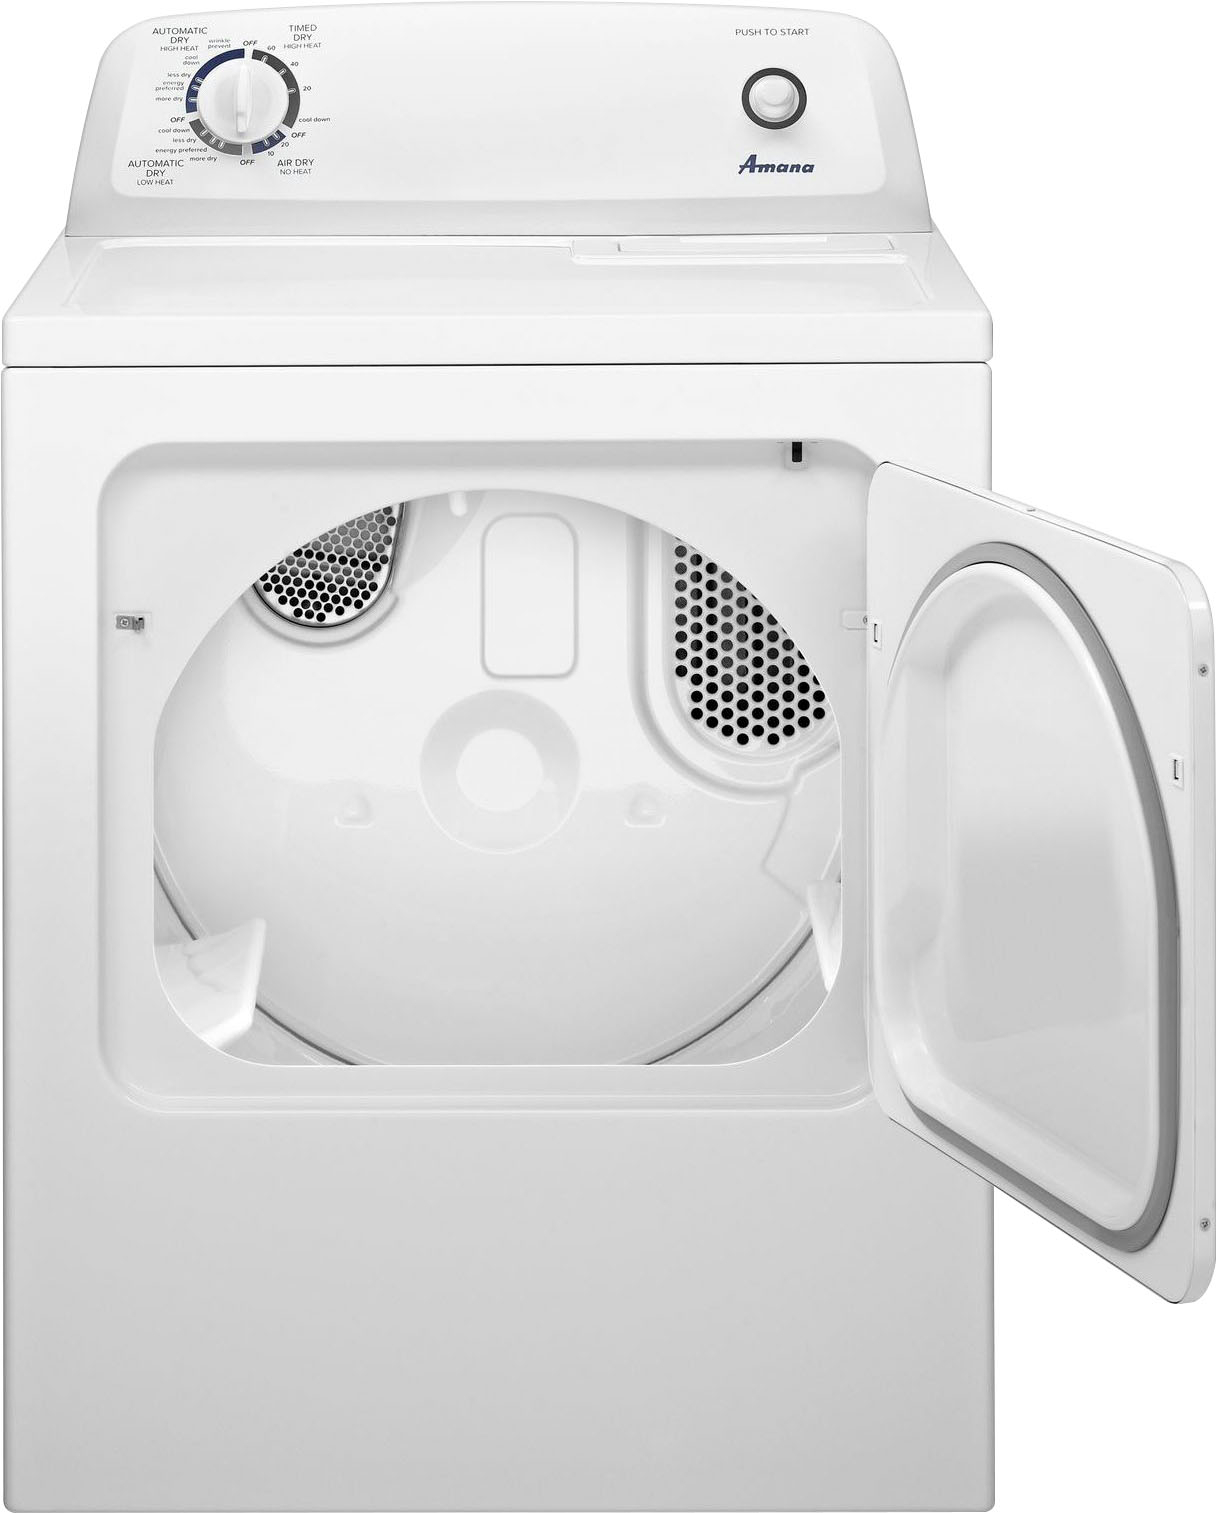 Angle View: Whirlpool - 7 Cu. Ft. Gas Dryer with AutoDry Drying System - White